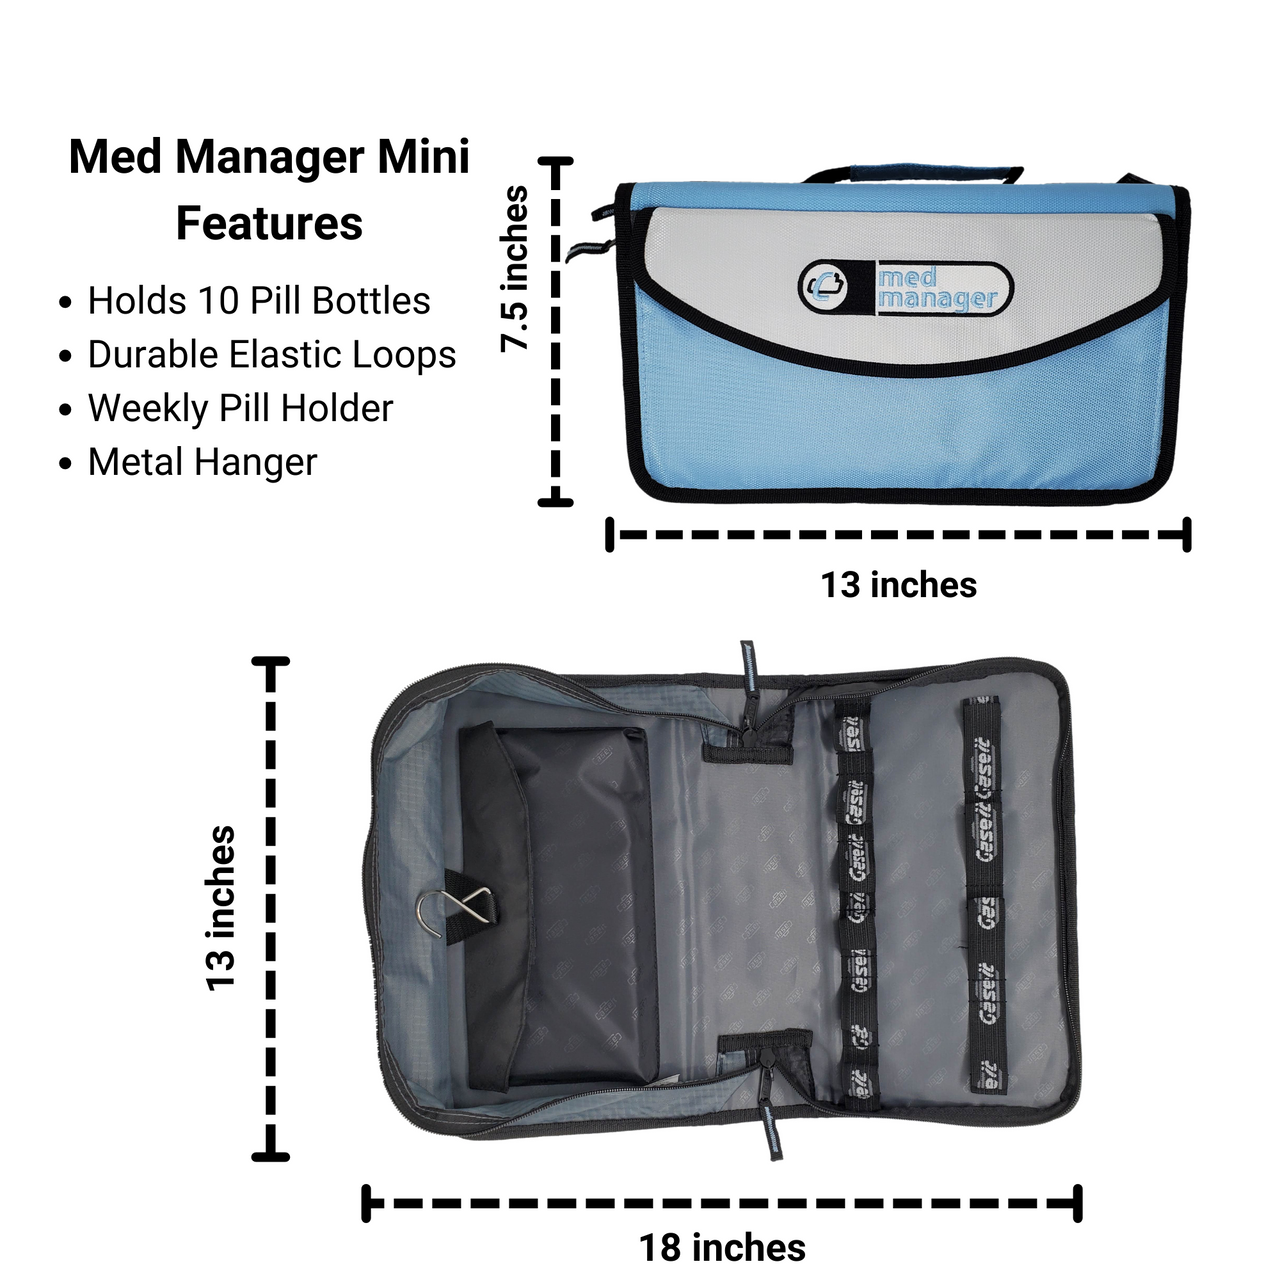  Med Manager Deluxe Medicine Organizer and Pill Case, Holds (15) Pill  Bottles - (11) Standard Size and (4) Large Bottles, Purple, 13 inches x 13  inches x 4.5 inches : Health & Household